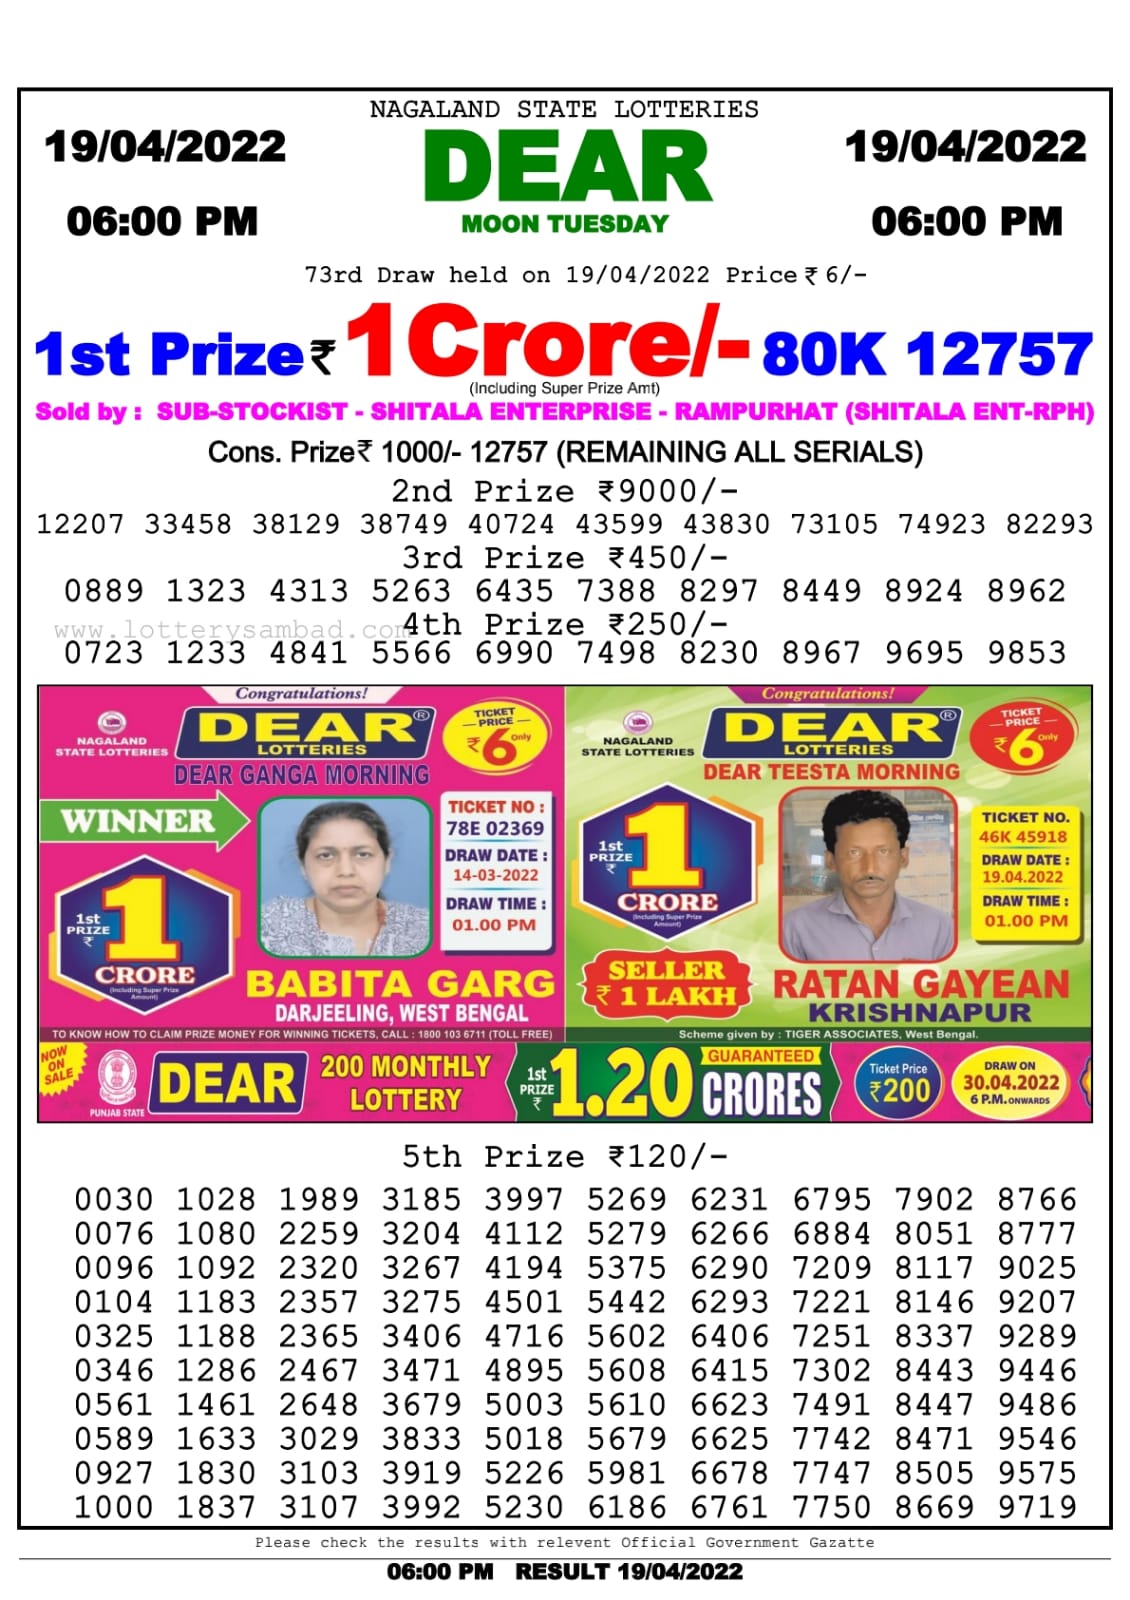 Dear Lottery Nagaland state Lottery Results 06.00 pm 19.04.2022